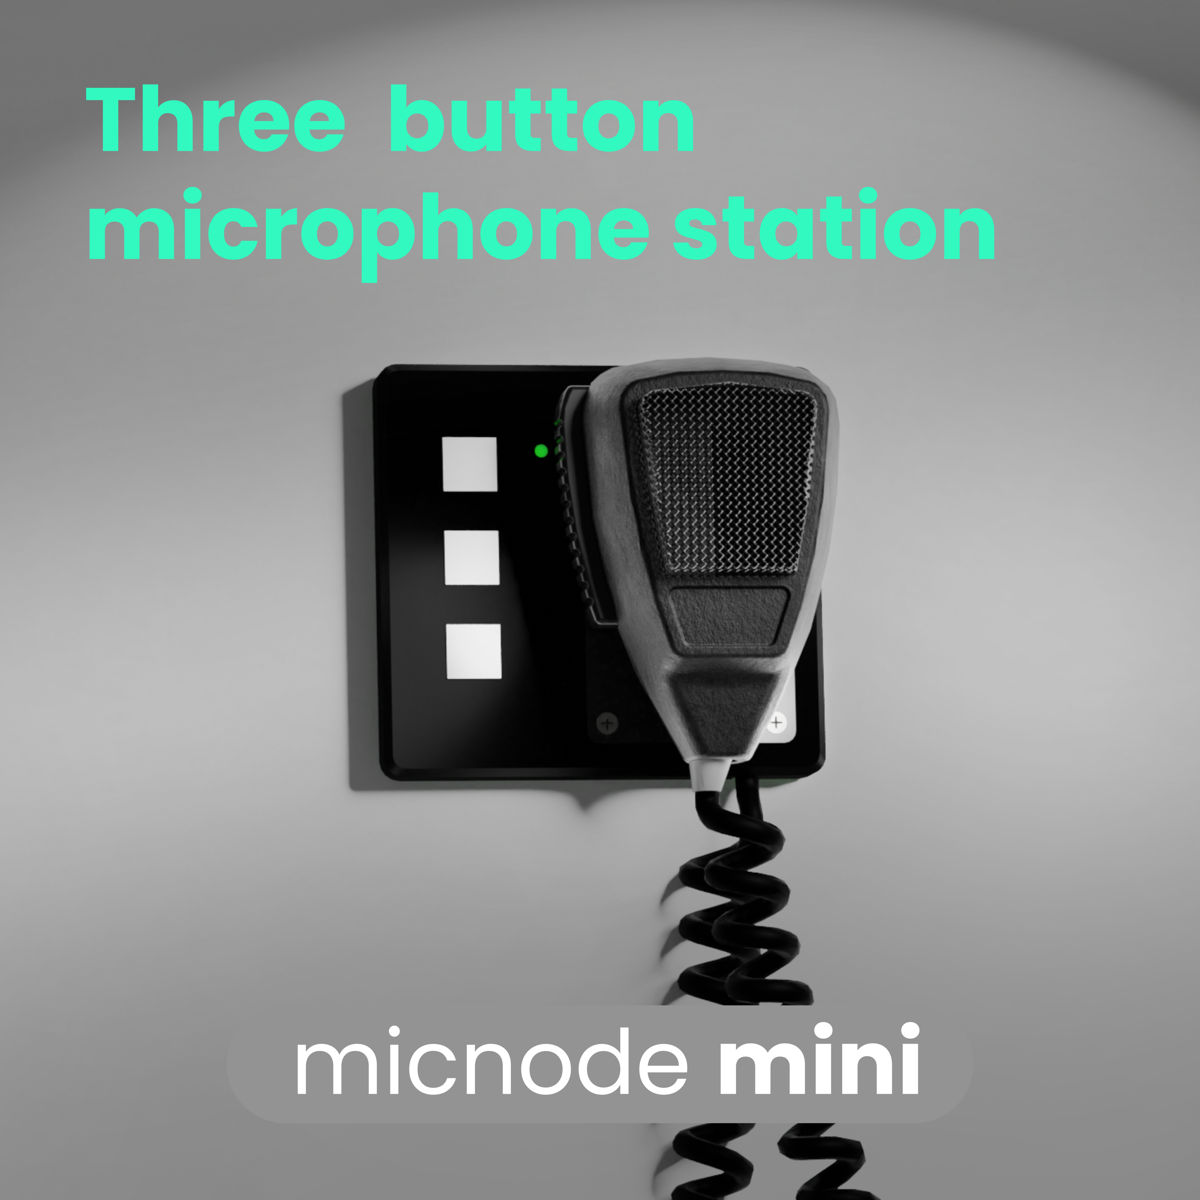  The compact micnode mini device is presented as a three button microphone station. 